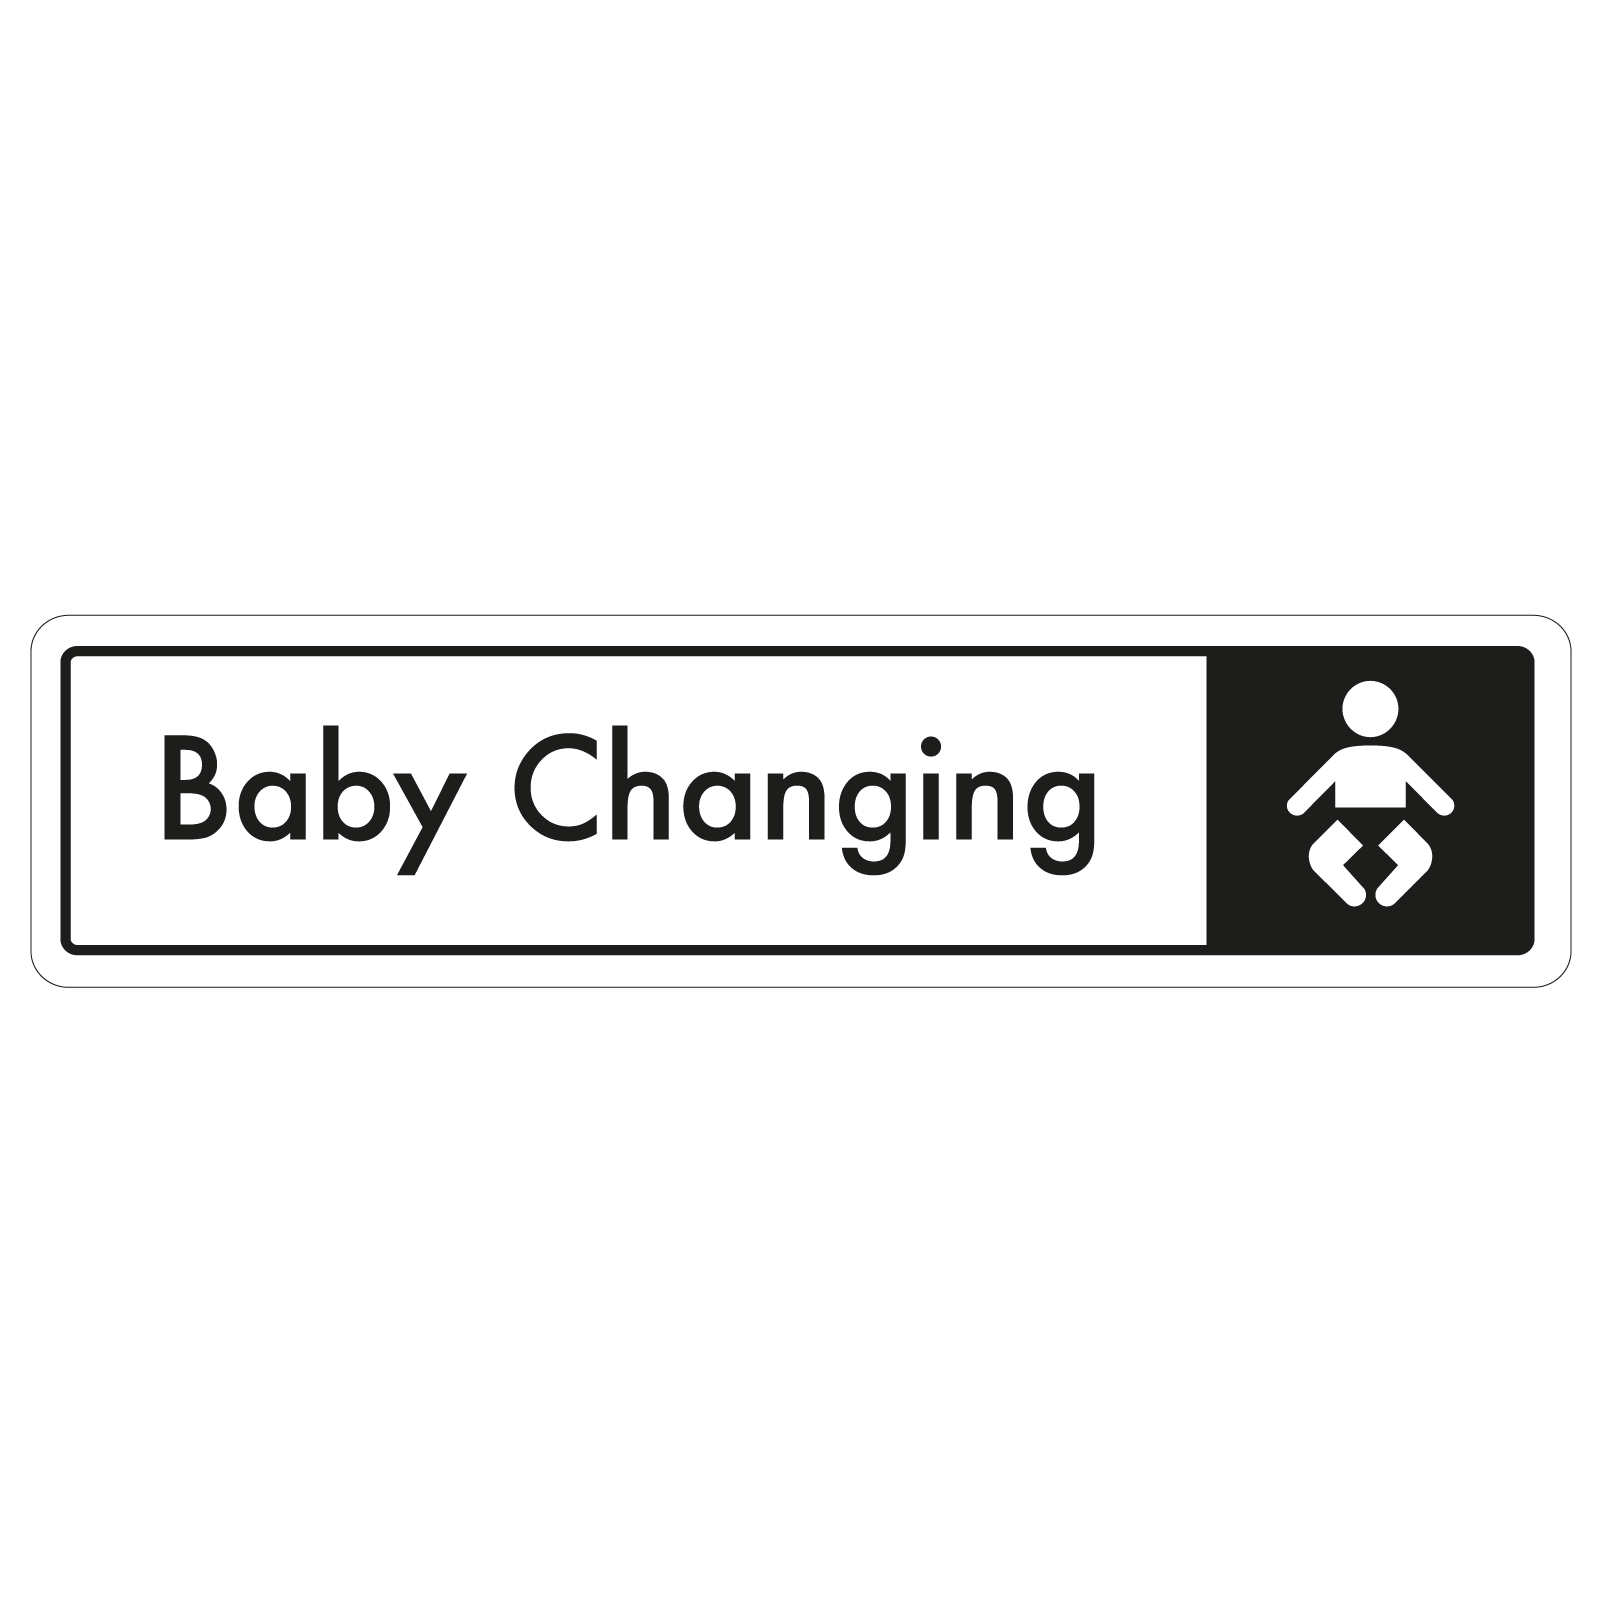 Baby Changing Door Sign - Black on White 